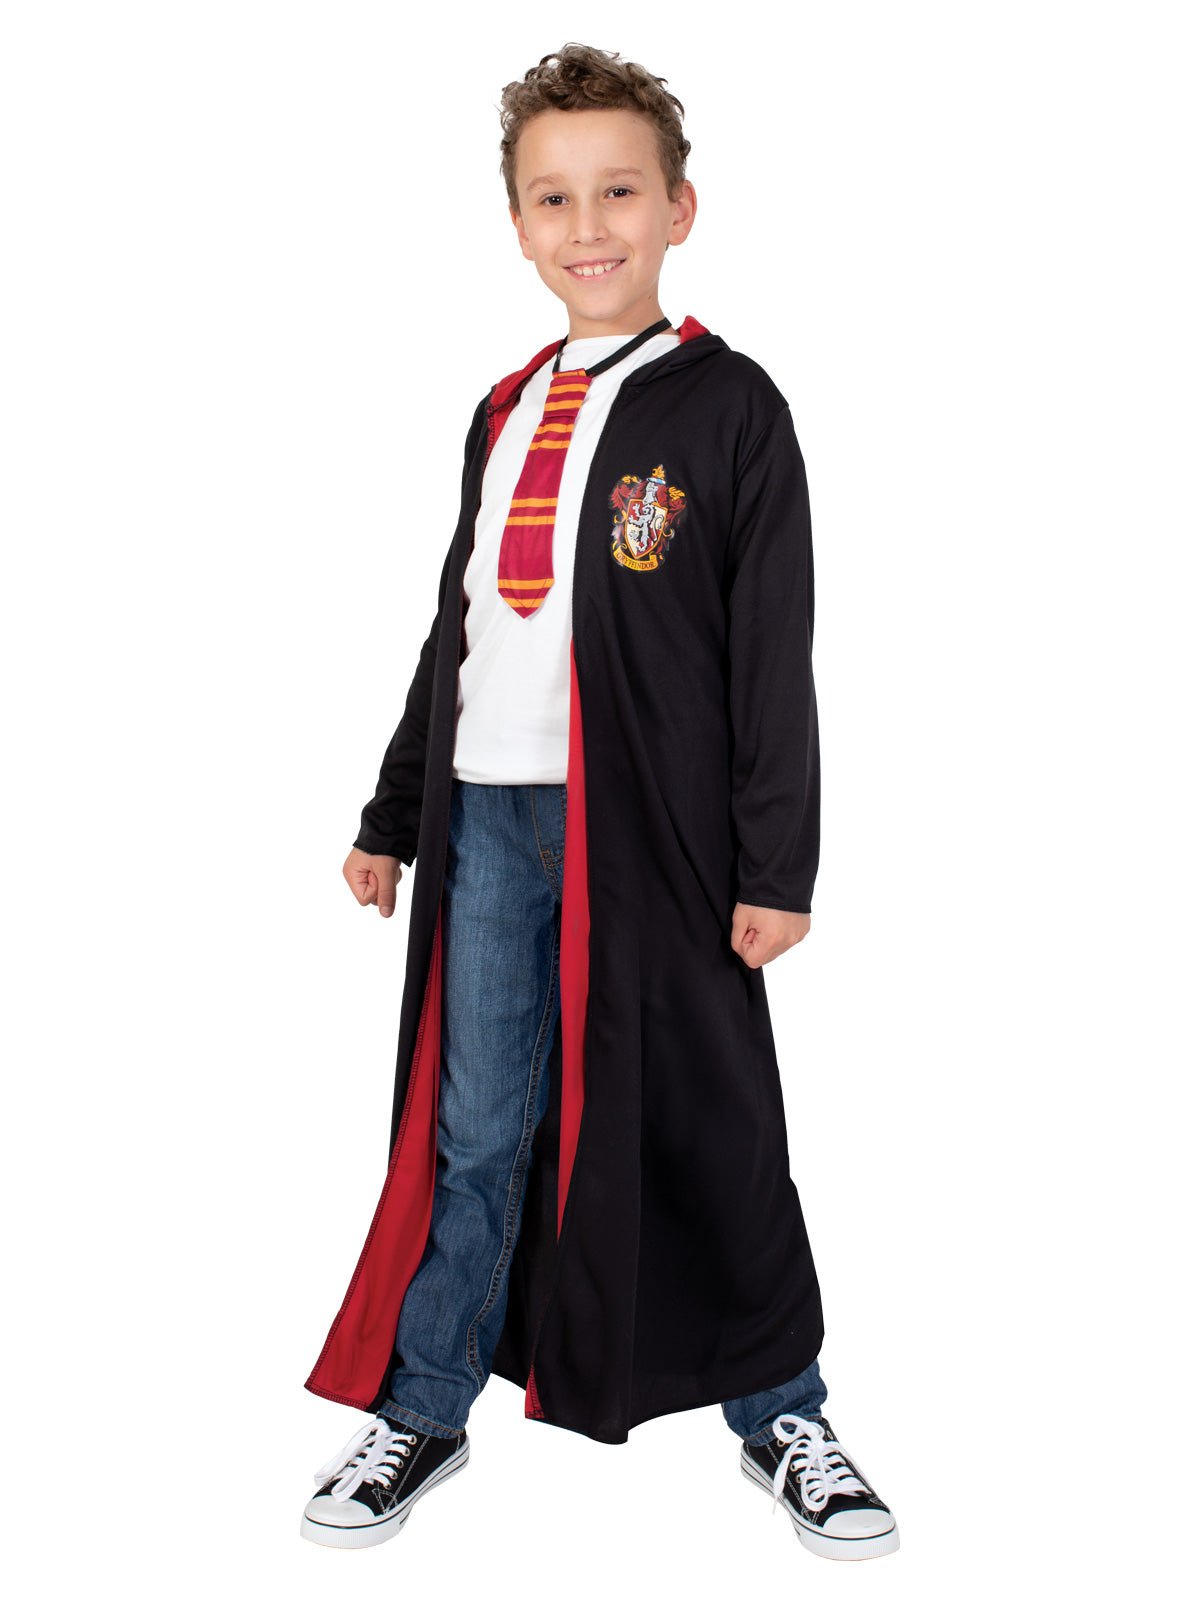 Kids, Get Ready to Cast Spells with Harry Potter Robe Set!